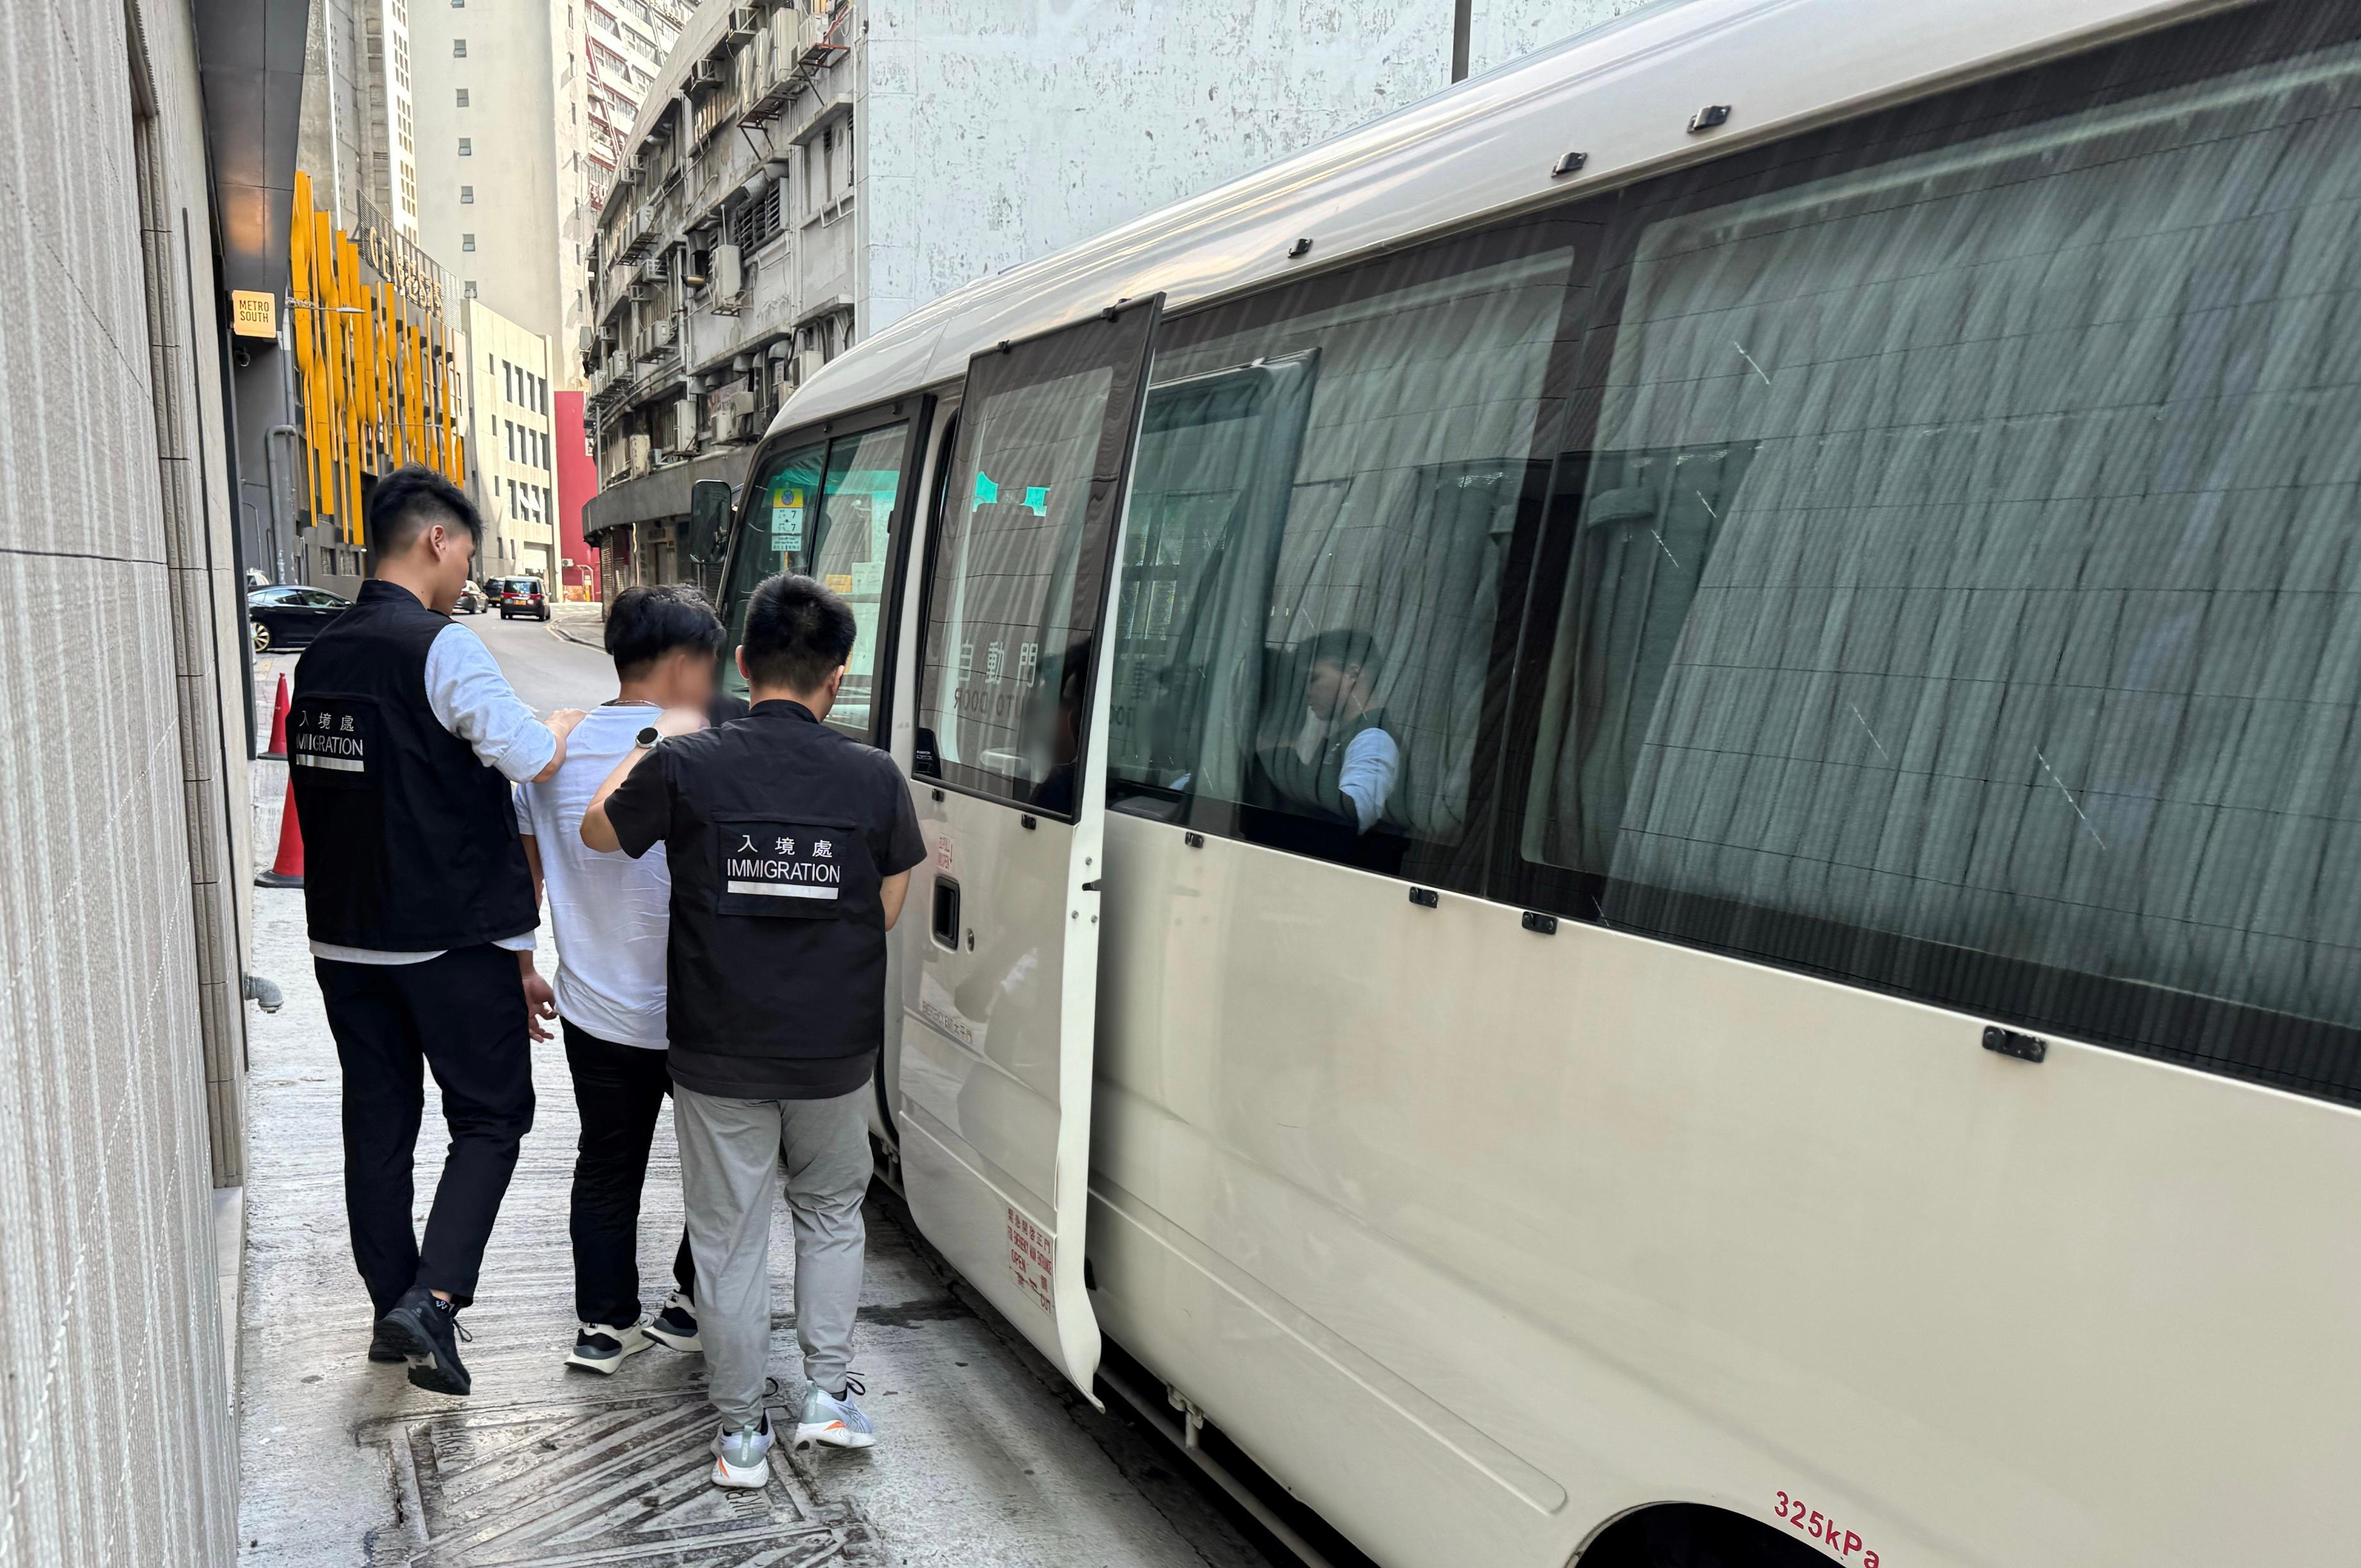 The Immigration Department mounted a series of territory-wide anti-illegal worker operations codenamed "Greenlane"," Lightshadow" and "Twilight" and joint operations with the Hong Kong Police Force codenamed "Champion" and "Windsand" for four consecutive days from June 24 to yesterday (June 27). Photo shows a suspected illegal worker arrested during an operation.